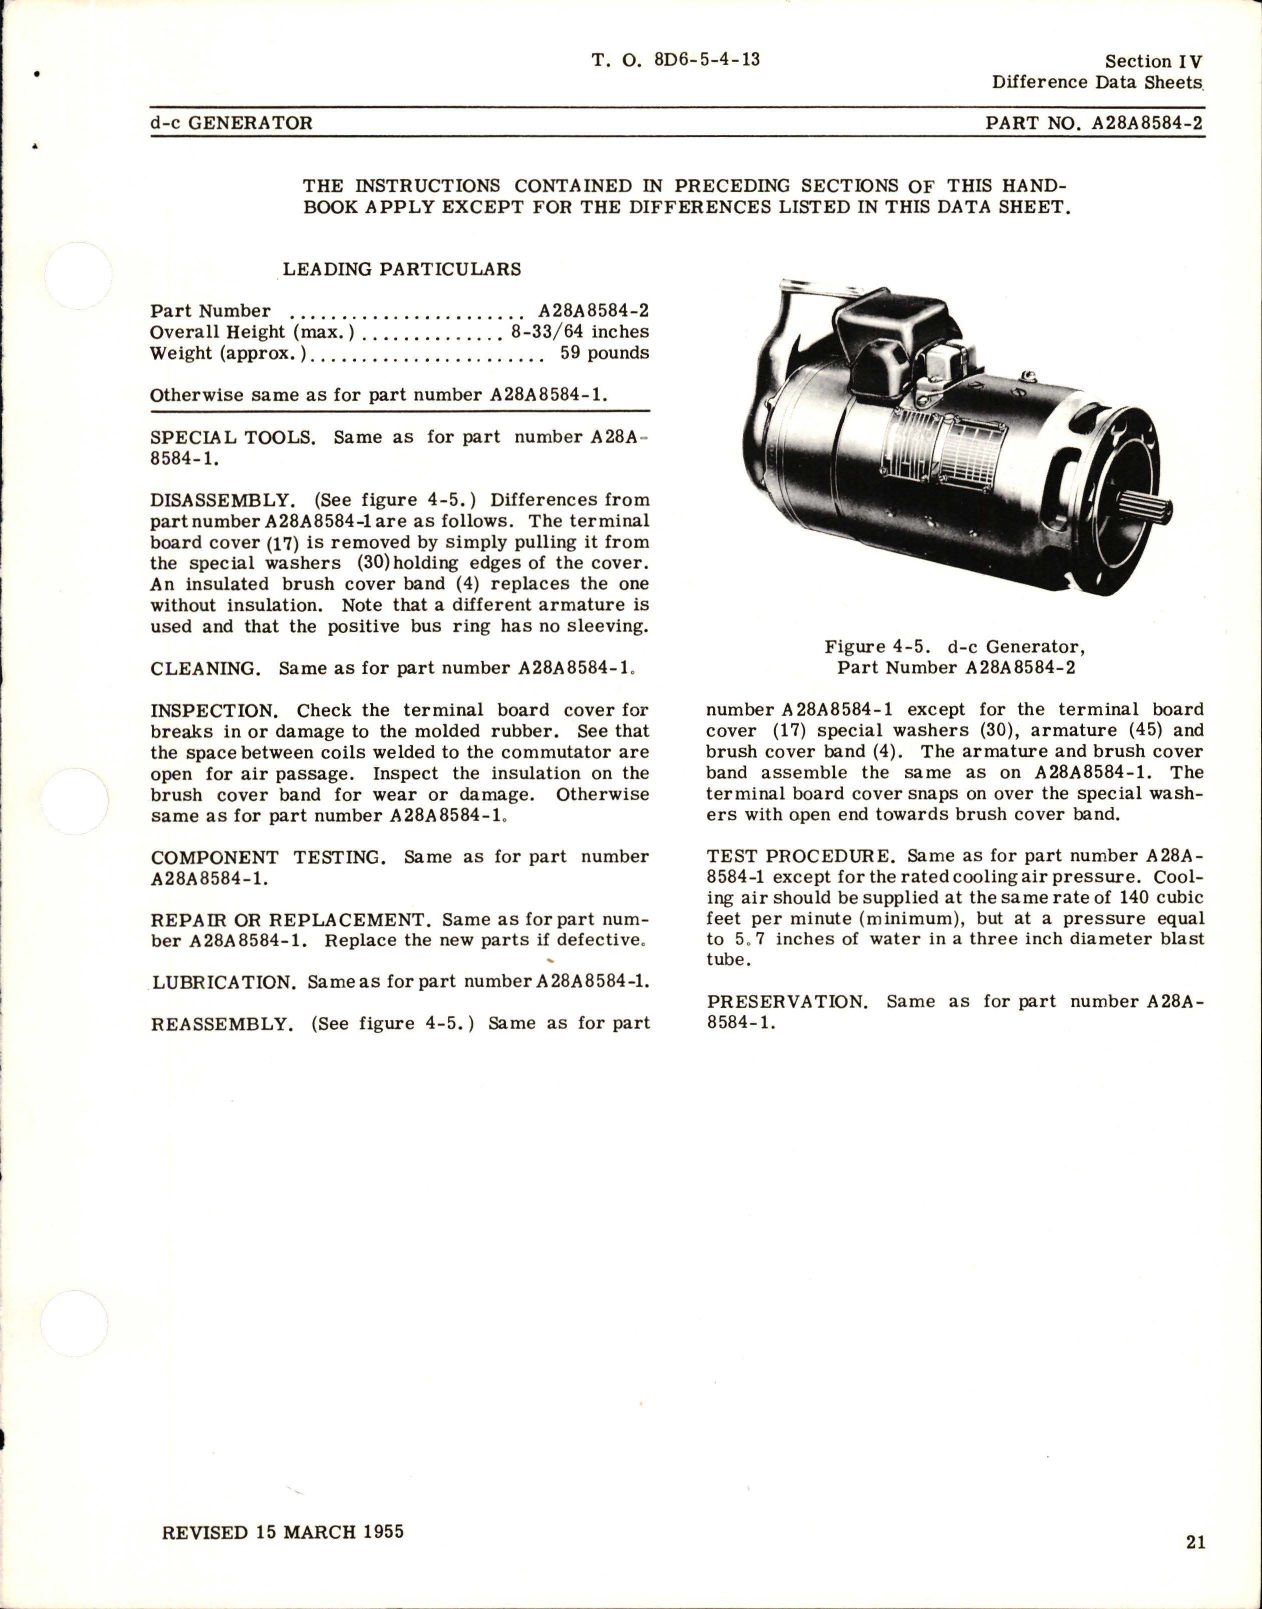 Sample page 5 from AirCorps Library document: Revision to Overhaul Instructions for DC Generators 